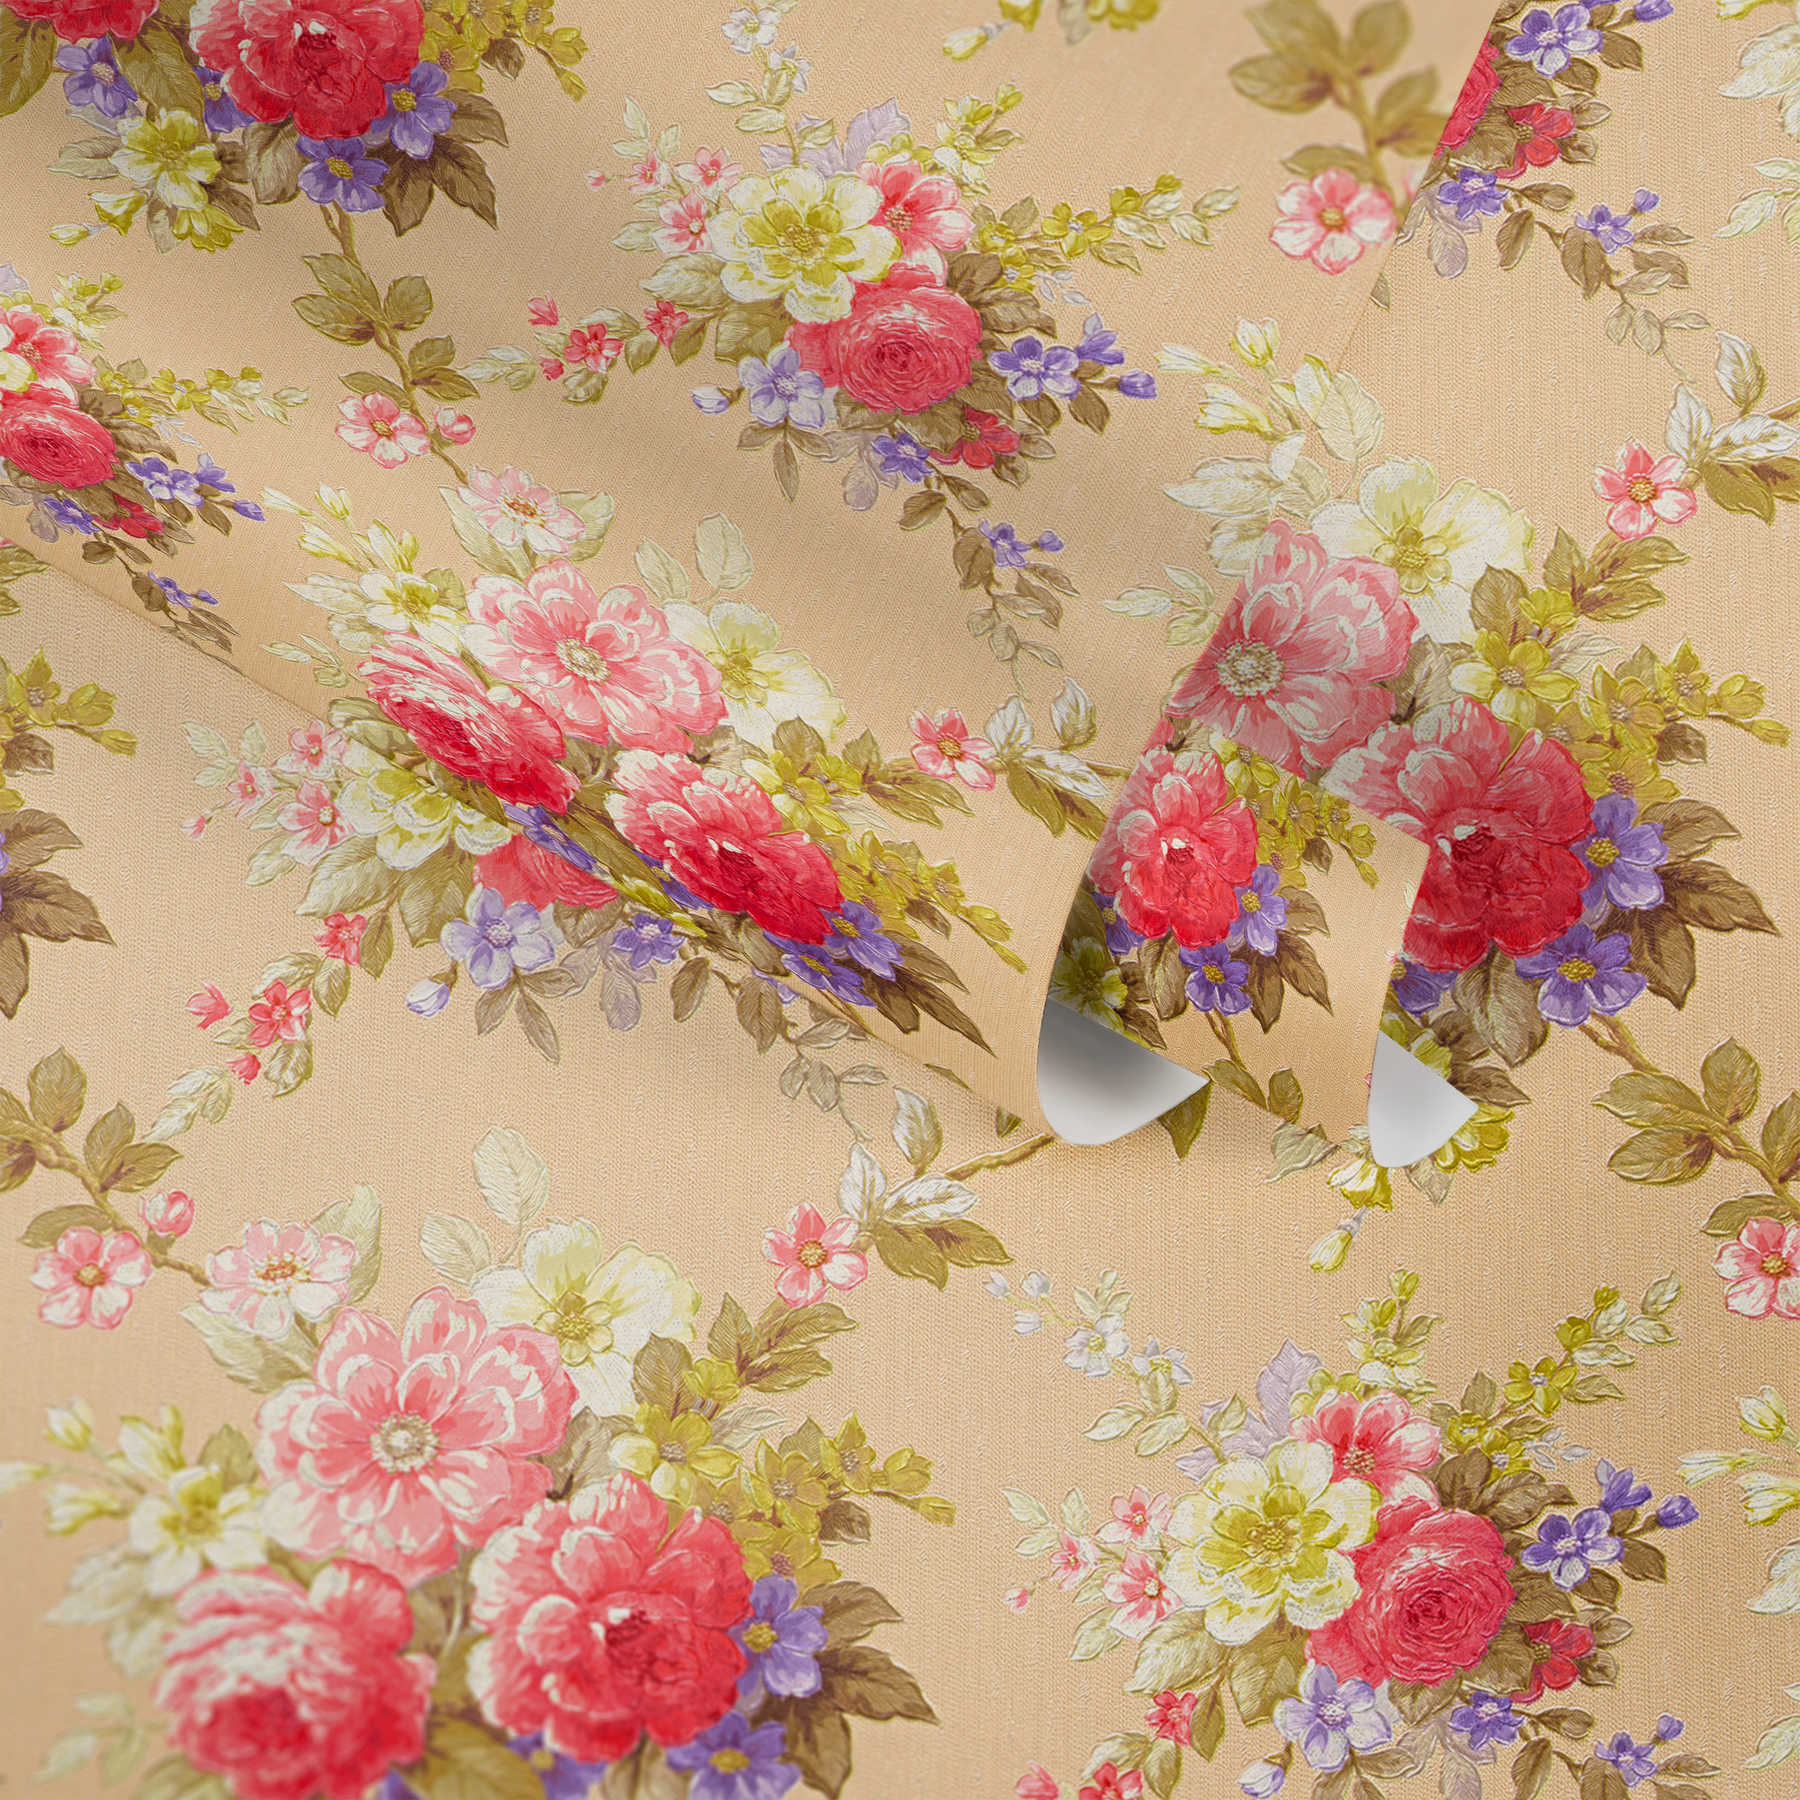             Wallpaper roses ornaments floral bouquet pattern - Colorful, Metallic
        